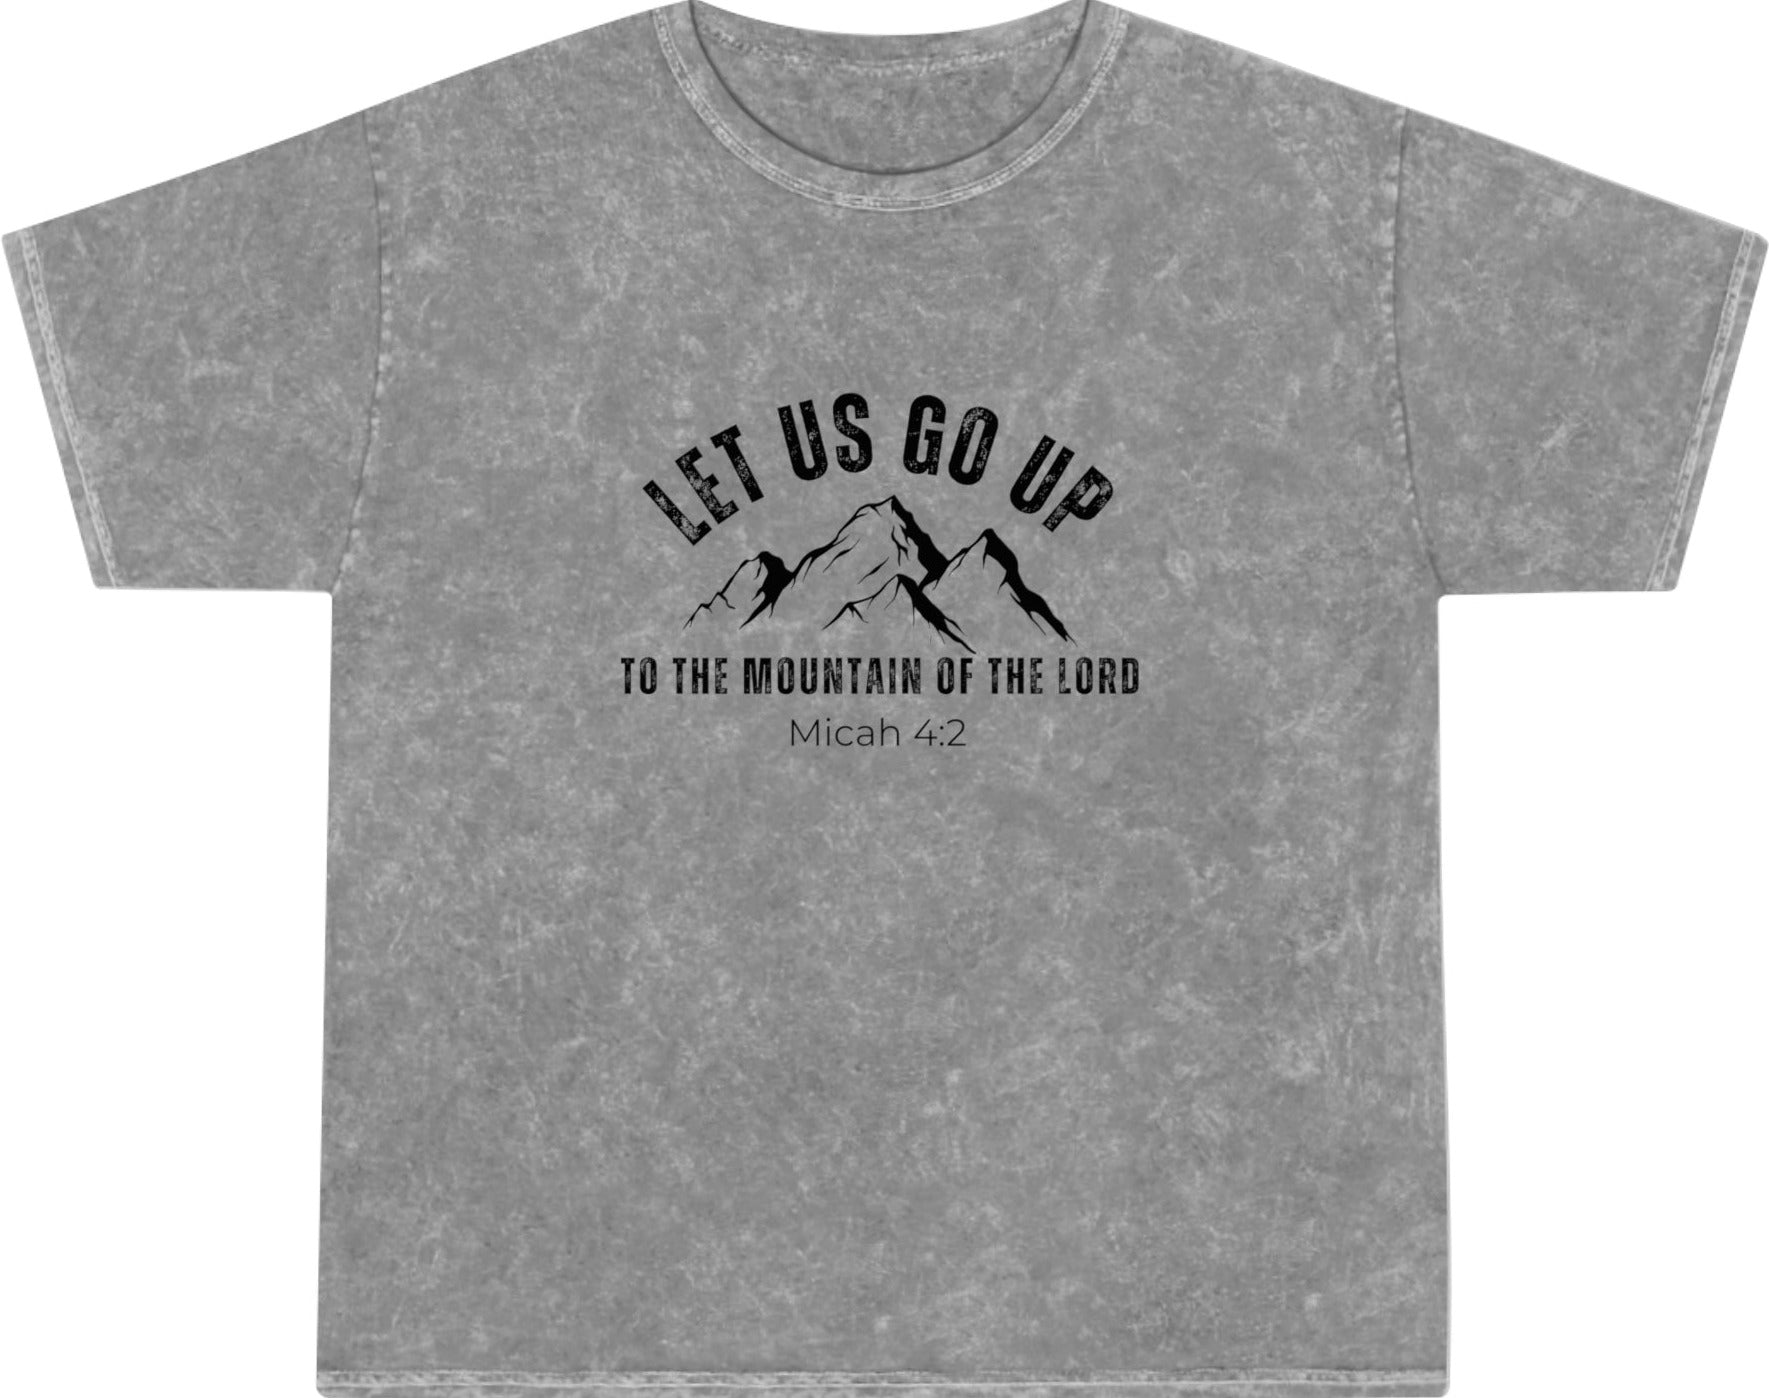 Micah 4:2, Unisex Mineral Wash Christian T-Shirt for men and woman gray